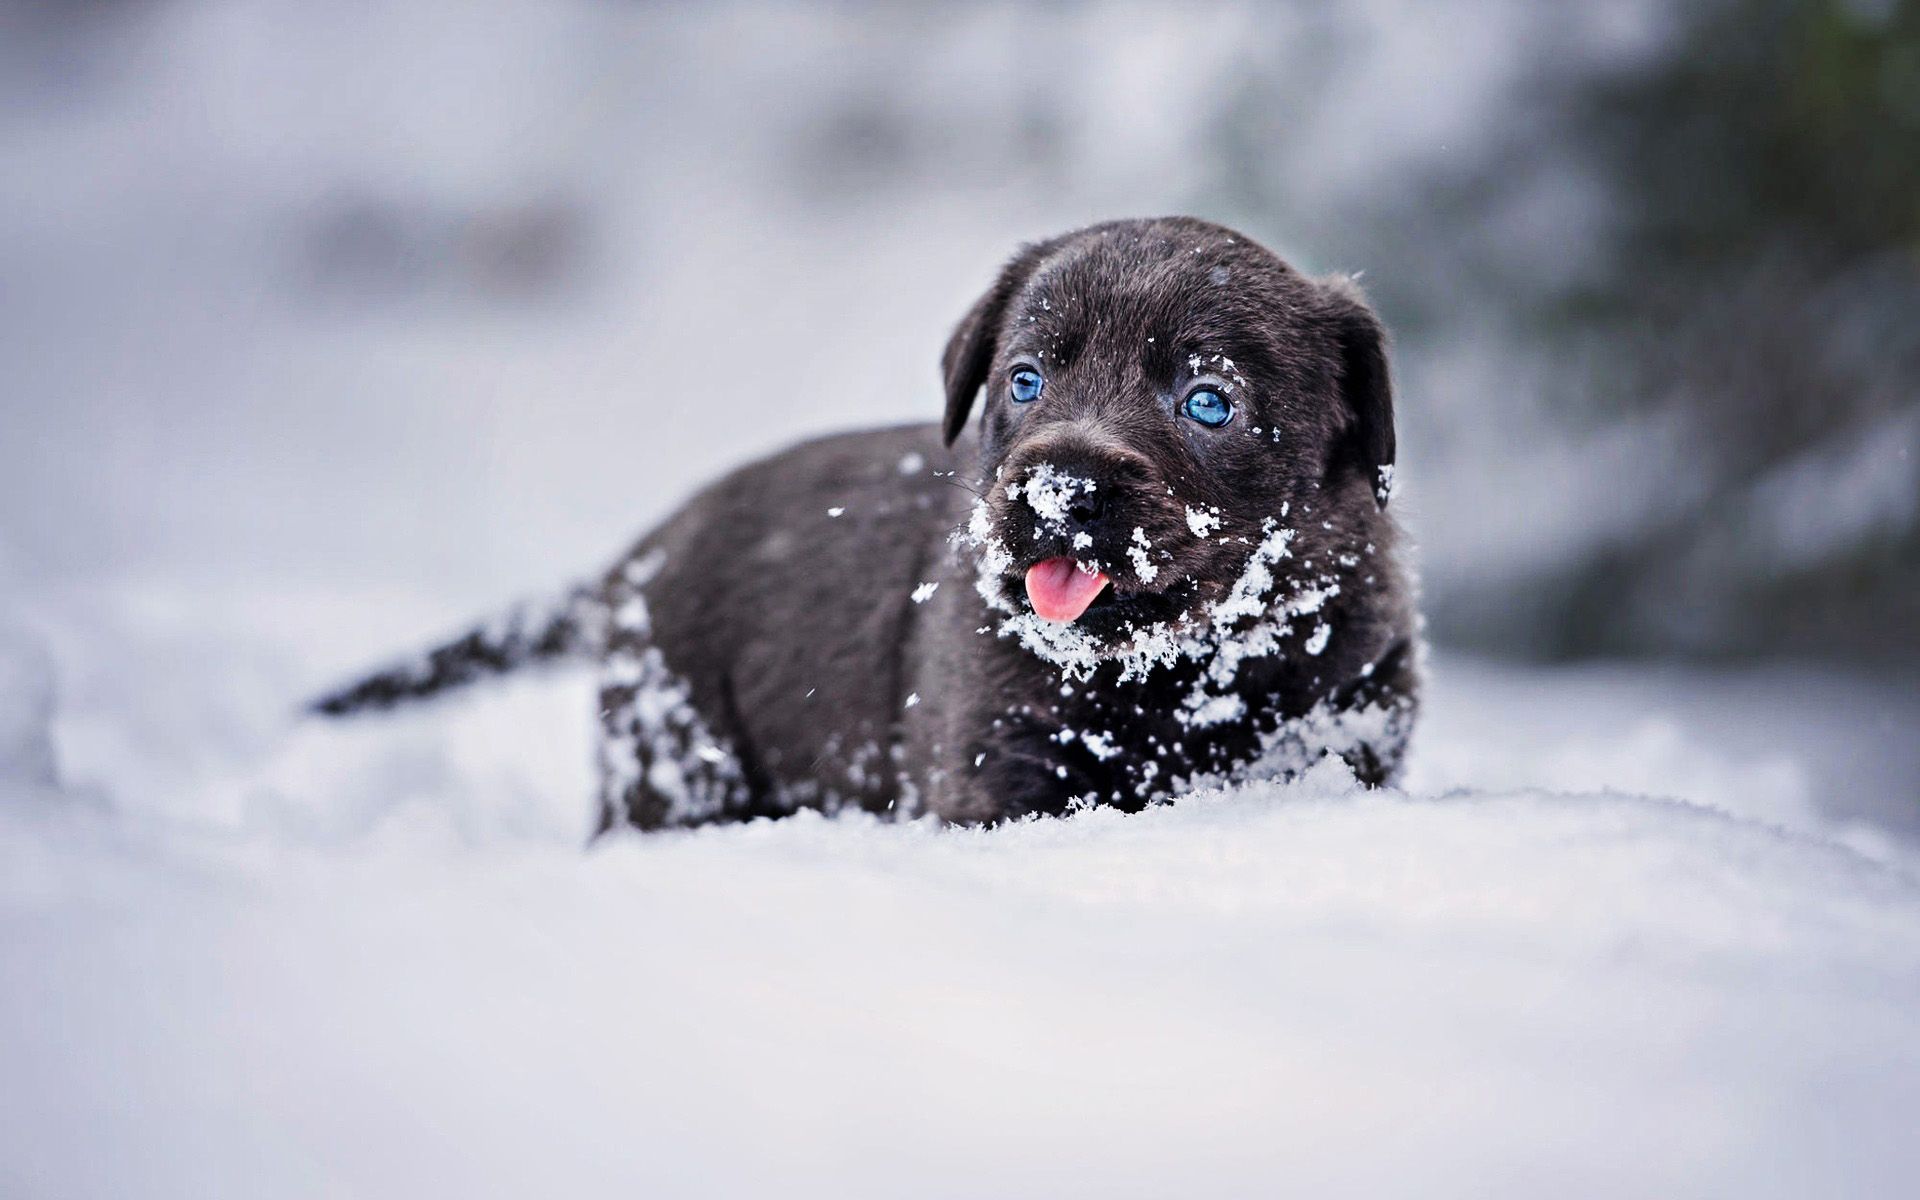 Download wallpaper black labrador, winter, snowdrifts, retriever, pets, puppy with blue eyes, black dog, small labrador, cute animals, black retriever, labradors for desktop with resolution 1920x1200. High Quality HD picture wallpaper